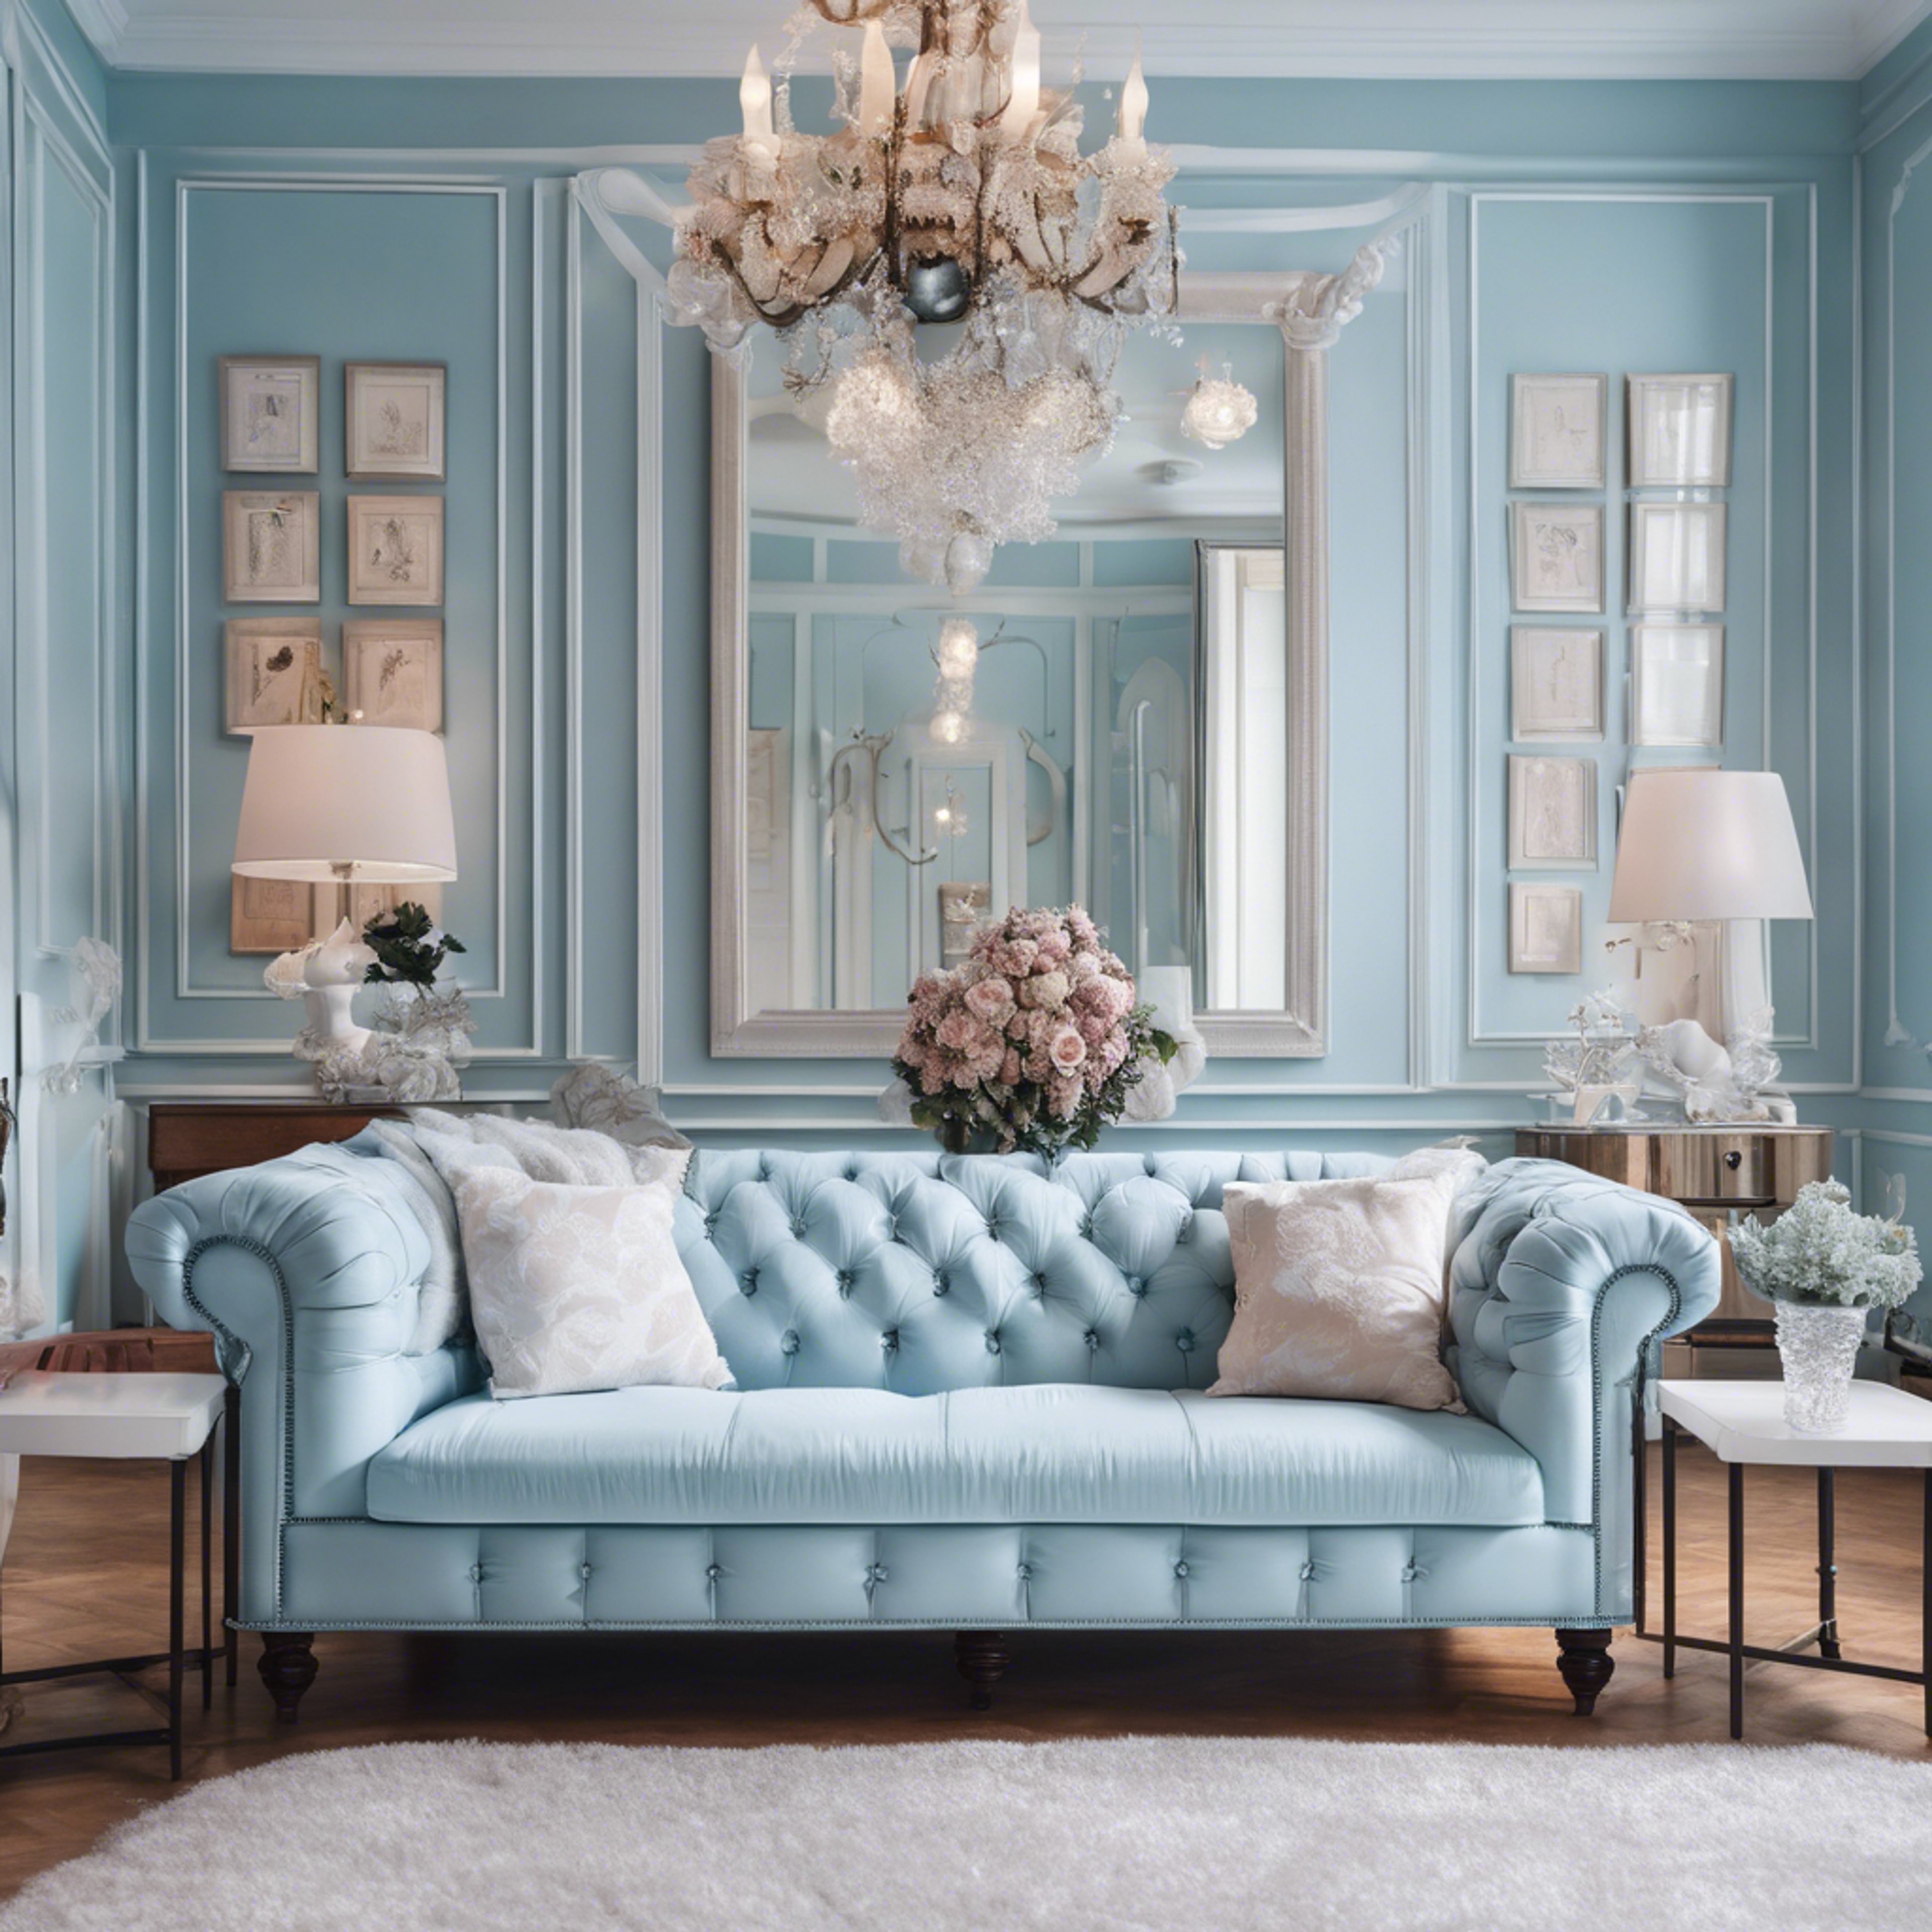 A preppy styled room with pastel blue wallpaper, Chesterfield sofa, and white French style furniture.” 墙纸[3904fac215ba4f1eaa62]